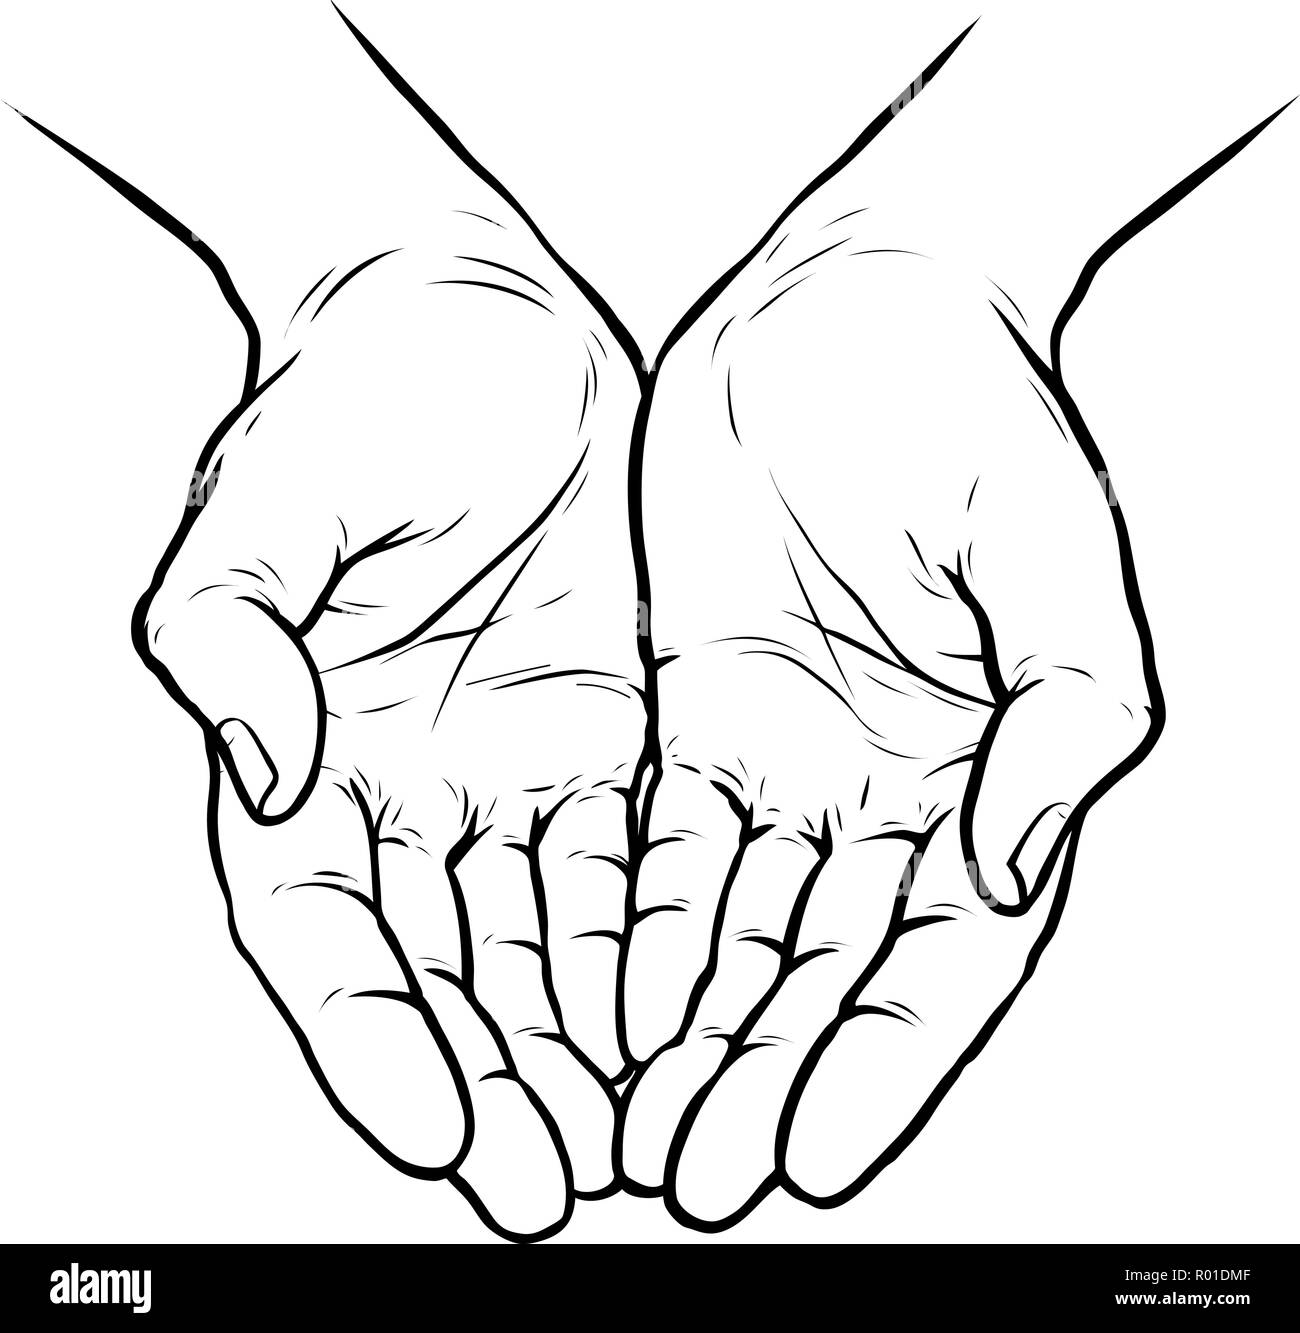 Hands Together Clipart Black And White